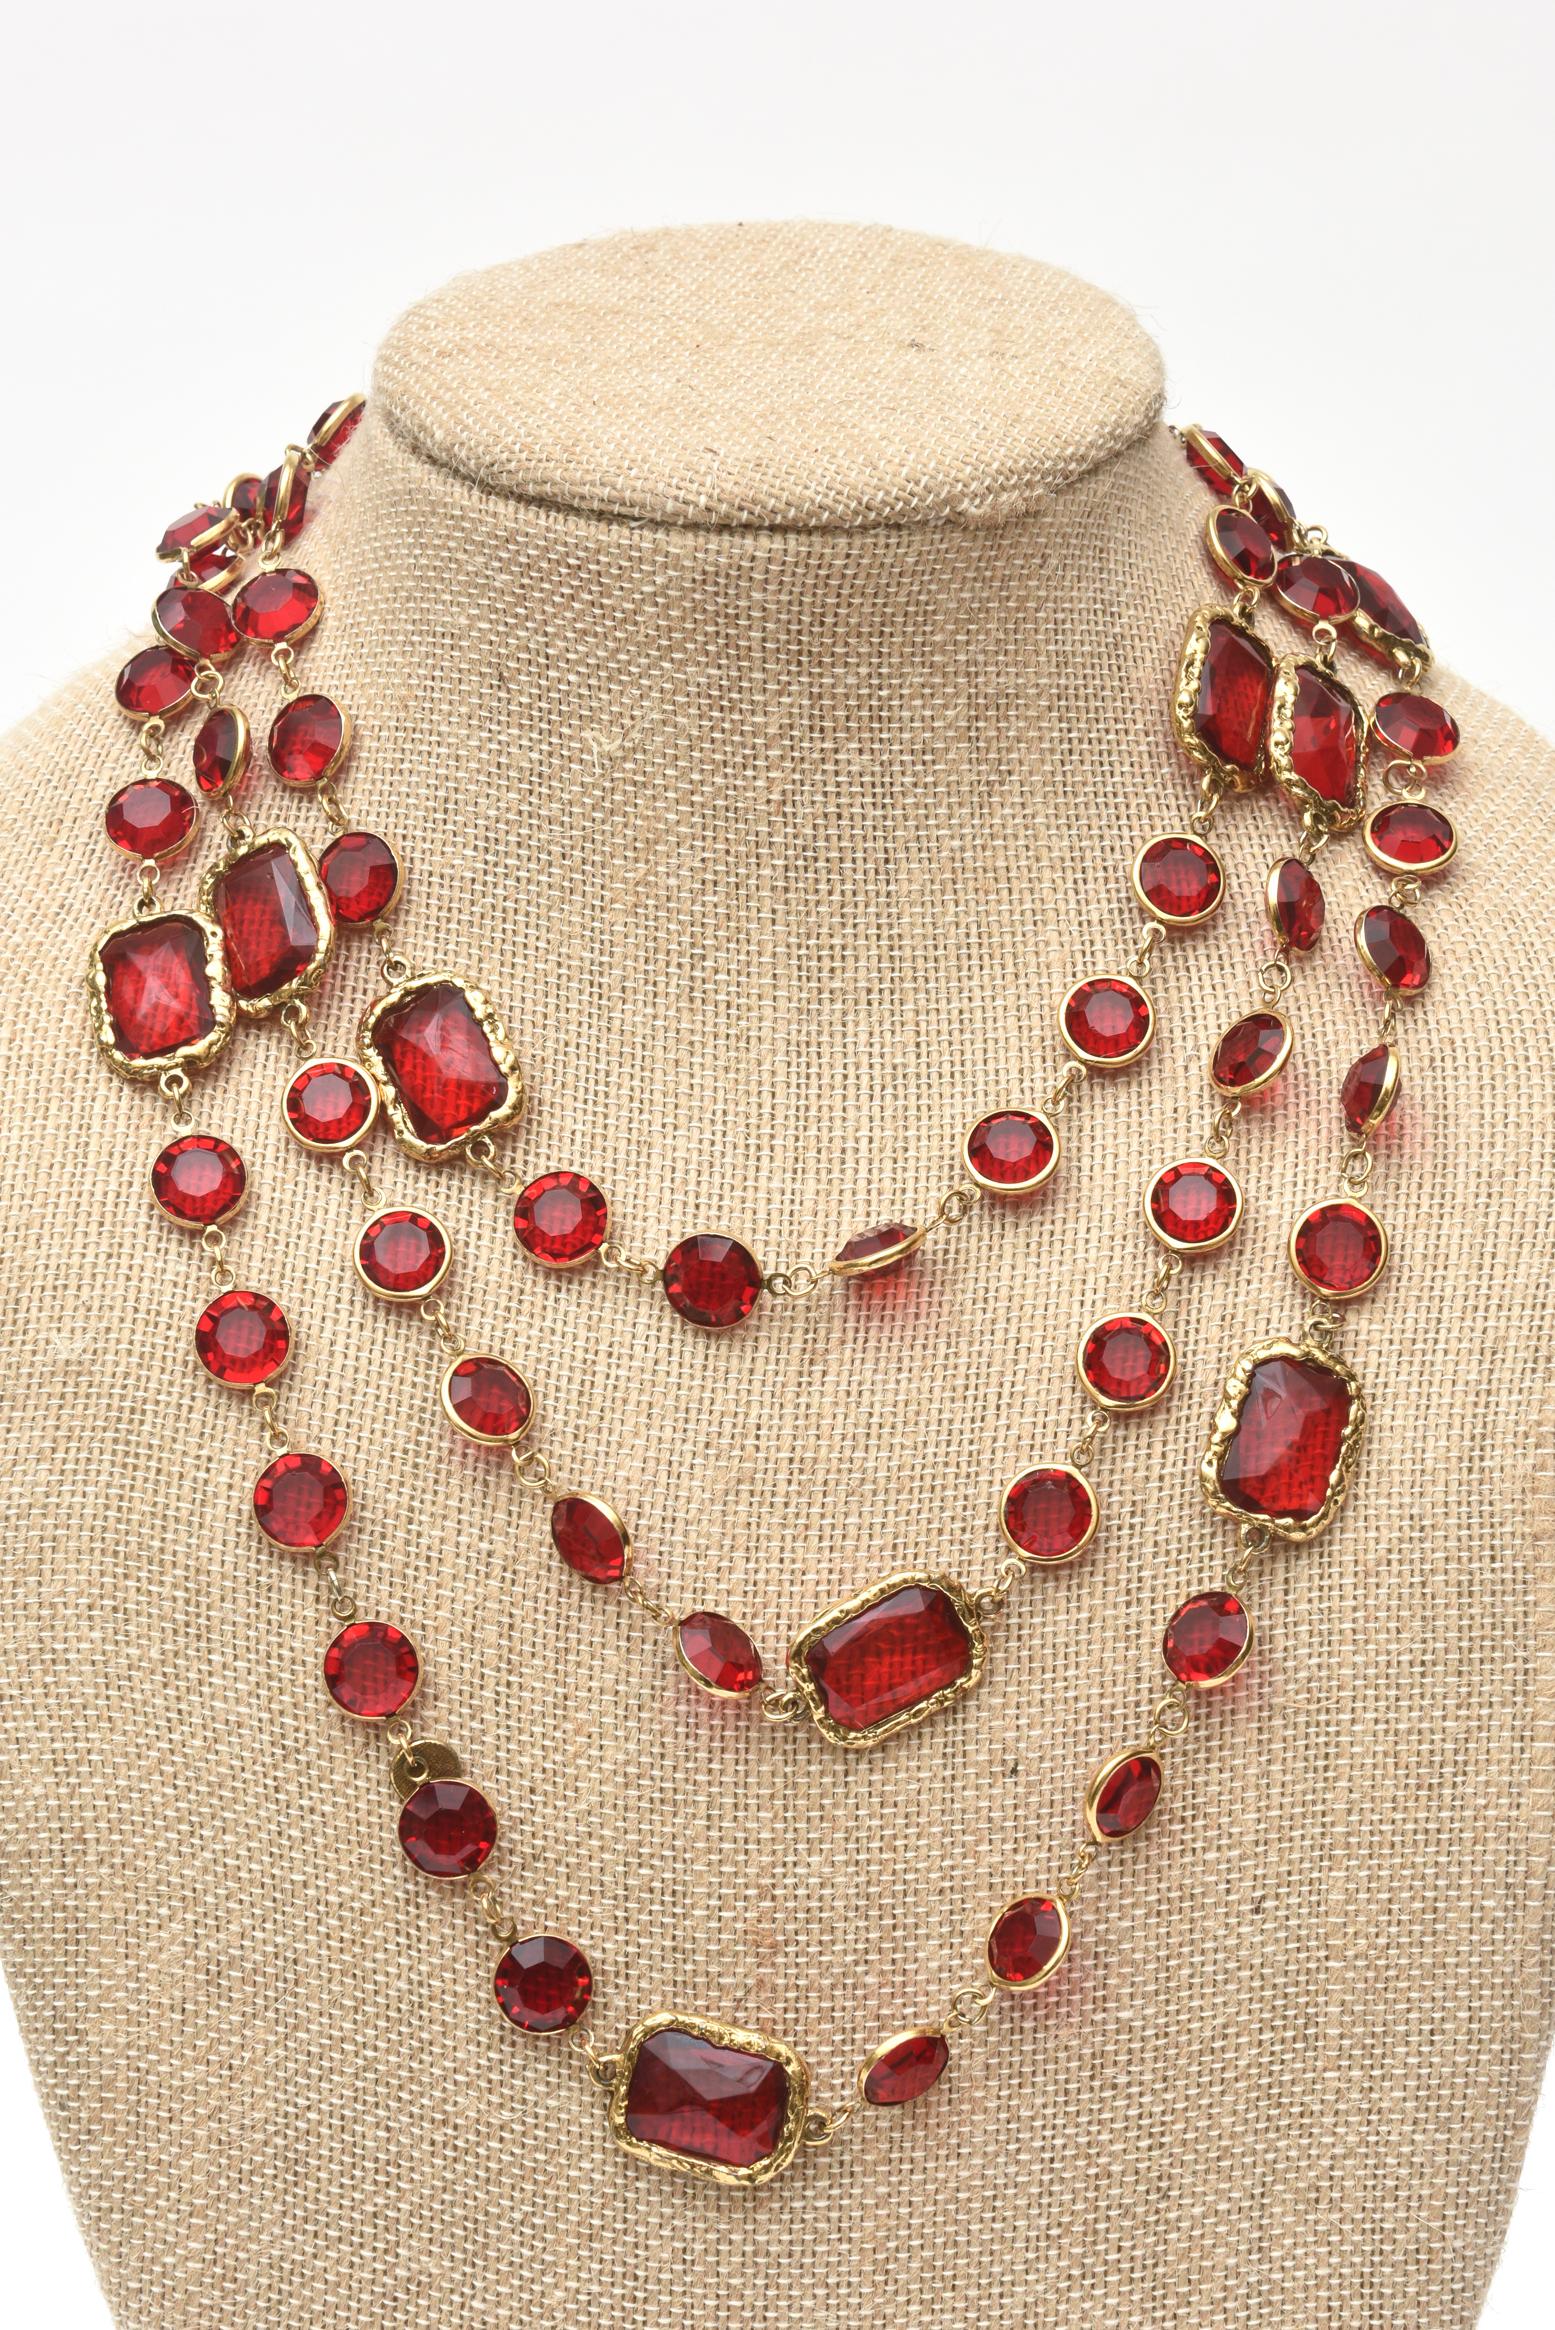 Chanel Ruby Red Crystal Chicklet Sautoir Necklace Vintage 2